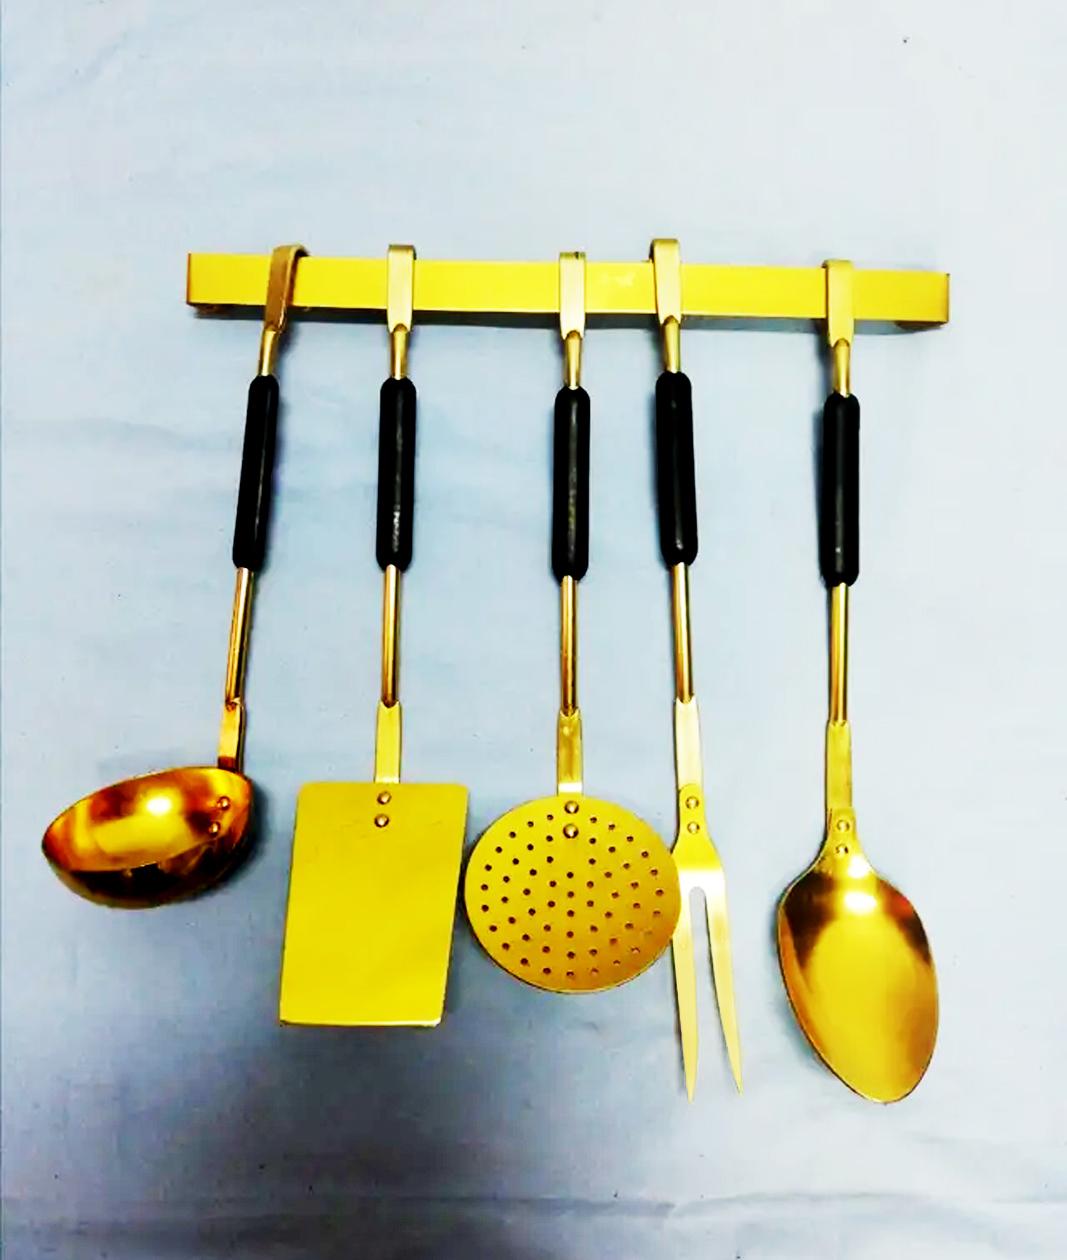 Old kitchen tools or utensils made of brass and plastic hanging from a hanging bar. Old kitchen appliance
 Midcentury 

Saucepan fork palette and serving pot

This set of brass utensils is ideal to decorate a kitchen of any style, , because its